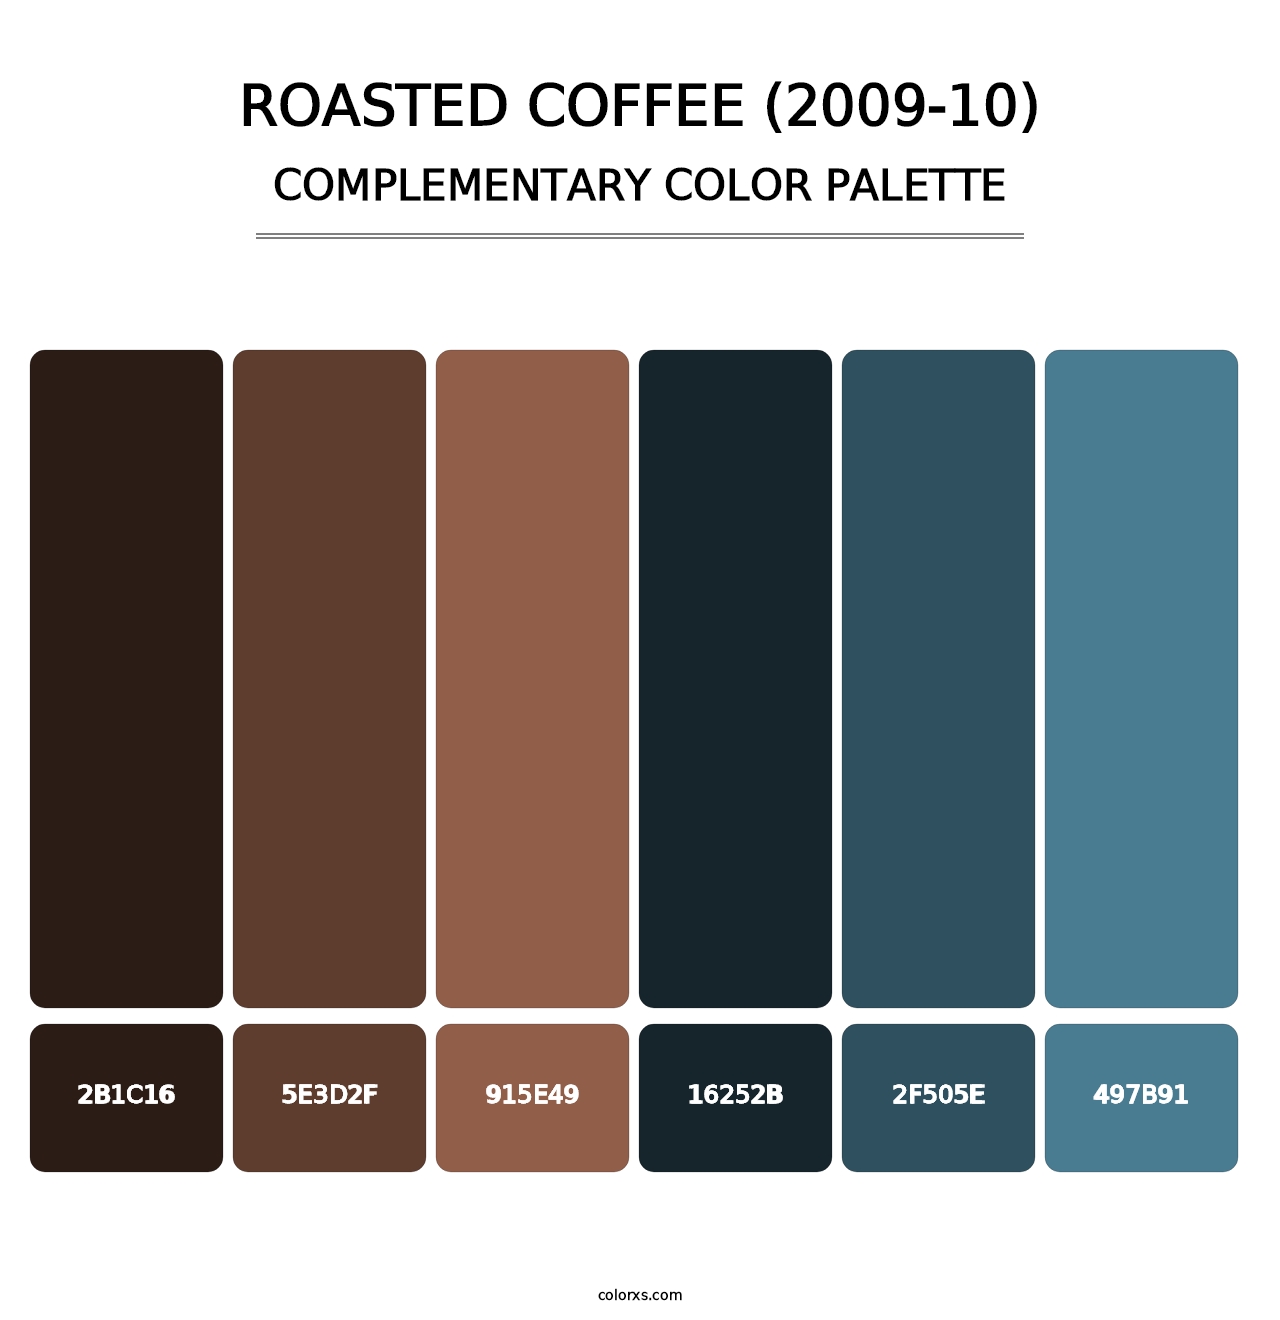 Roasted Coffee (2009-10) - Complementary Color Palette